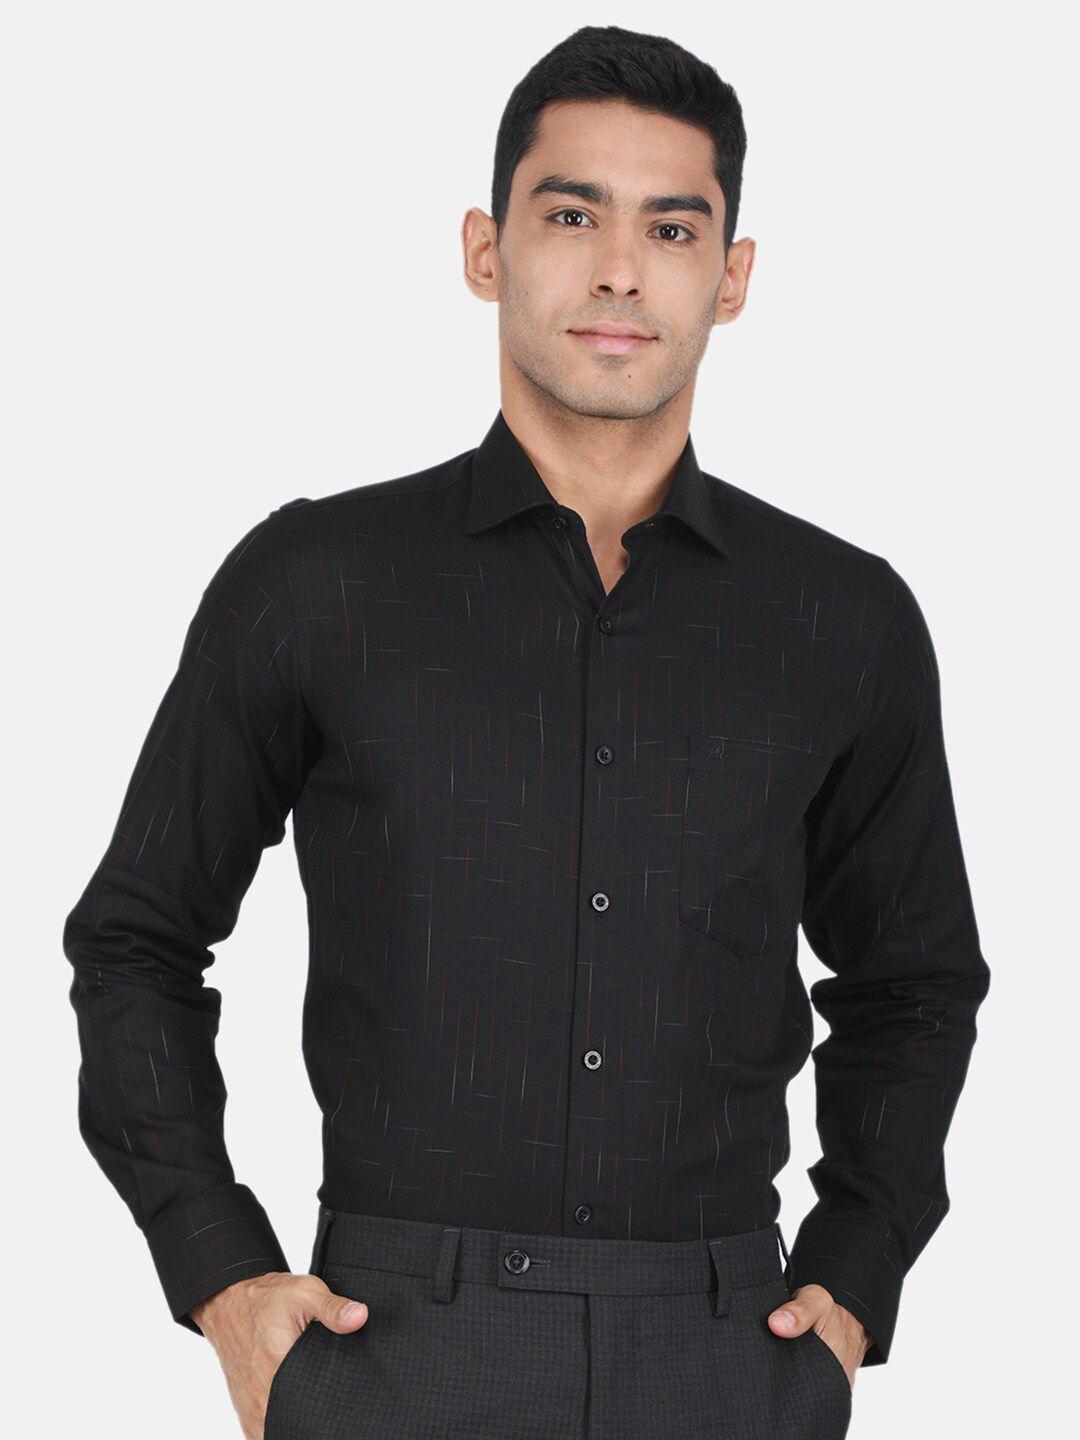 monte carlo abstract printed cotton casual shirt